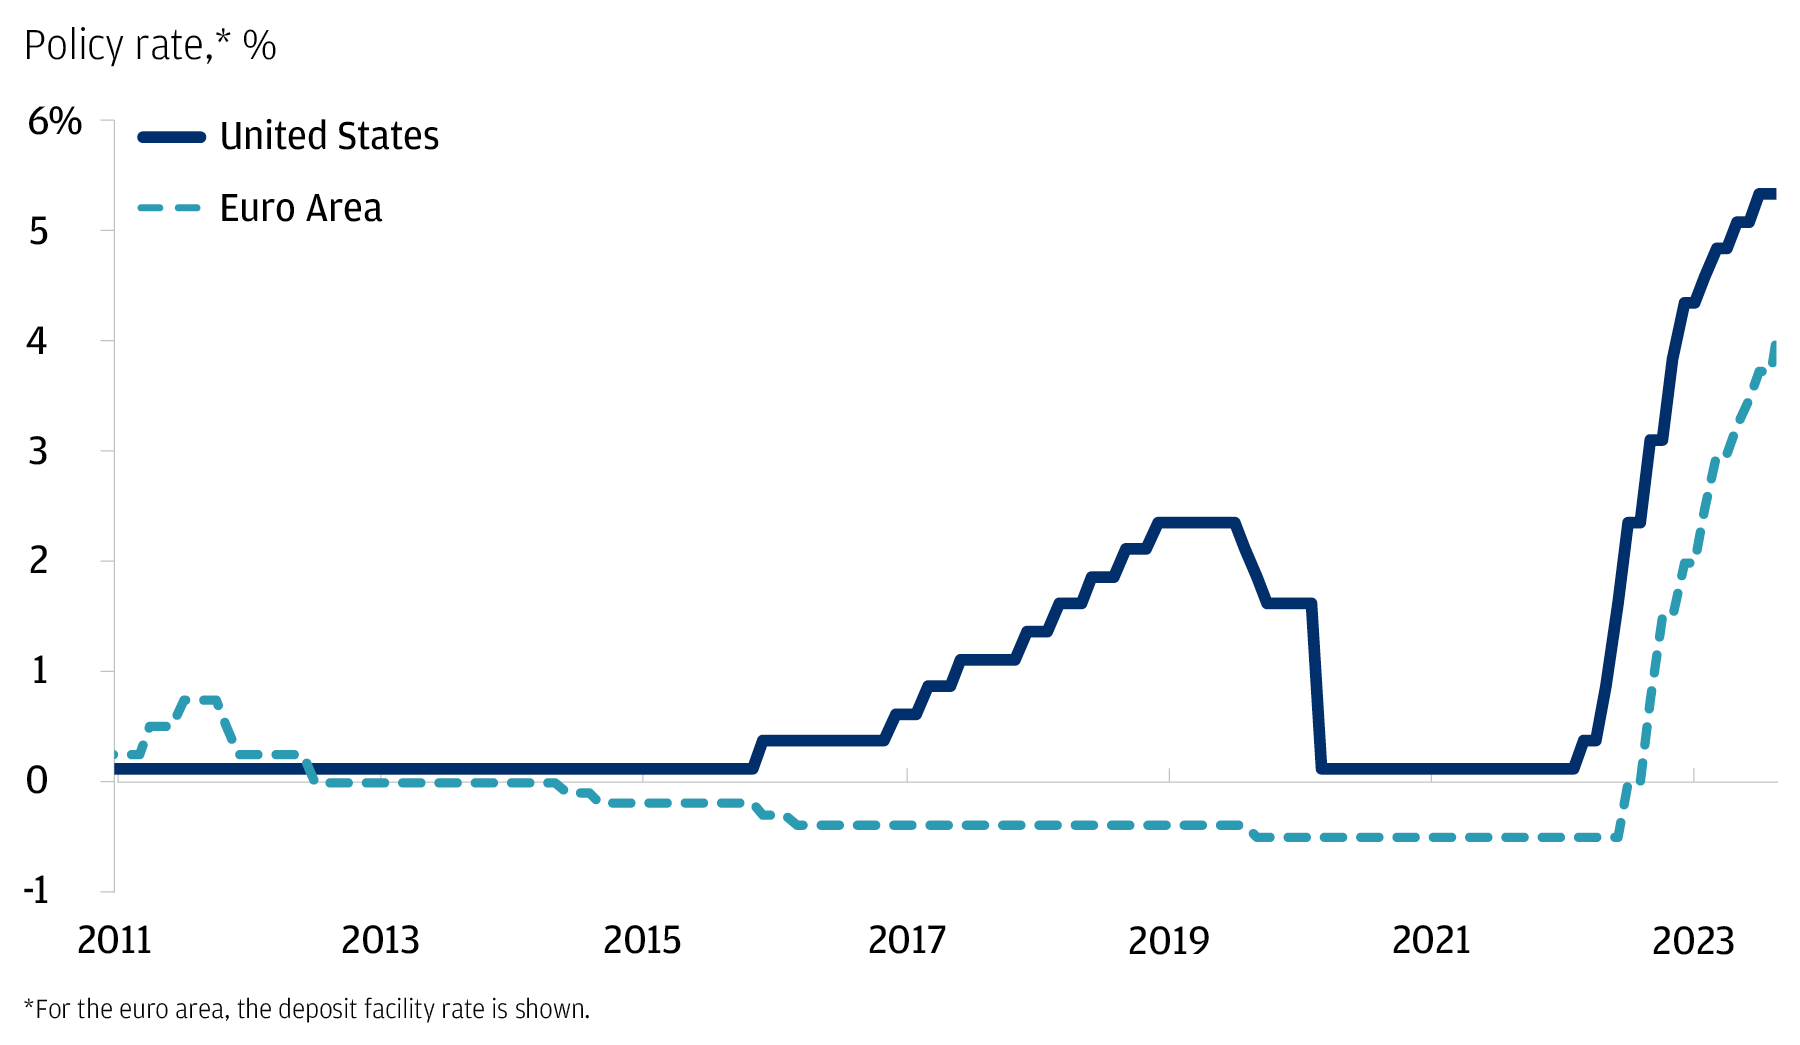 Line chart as of Sept. 14, 2023 showing U.S. and euro area central bank policy rates since 2011. Policy rates for both regions hovered around or below zero starting in early 2020, but over the past year have significantly increased as their central banks aggressively hiked.